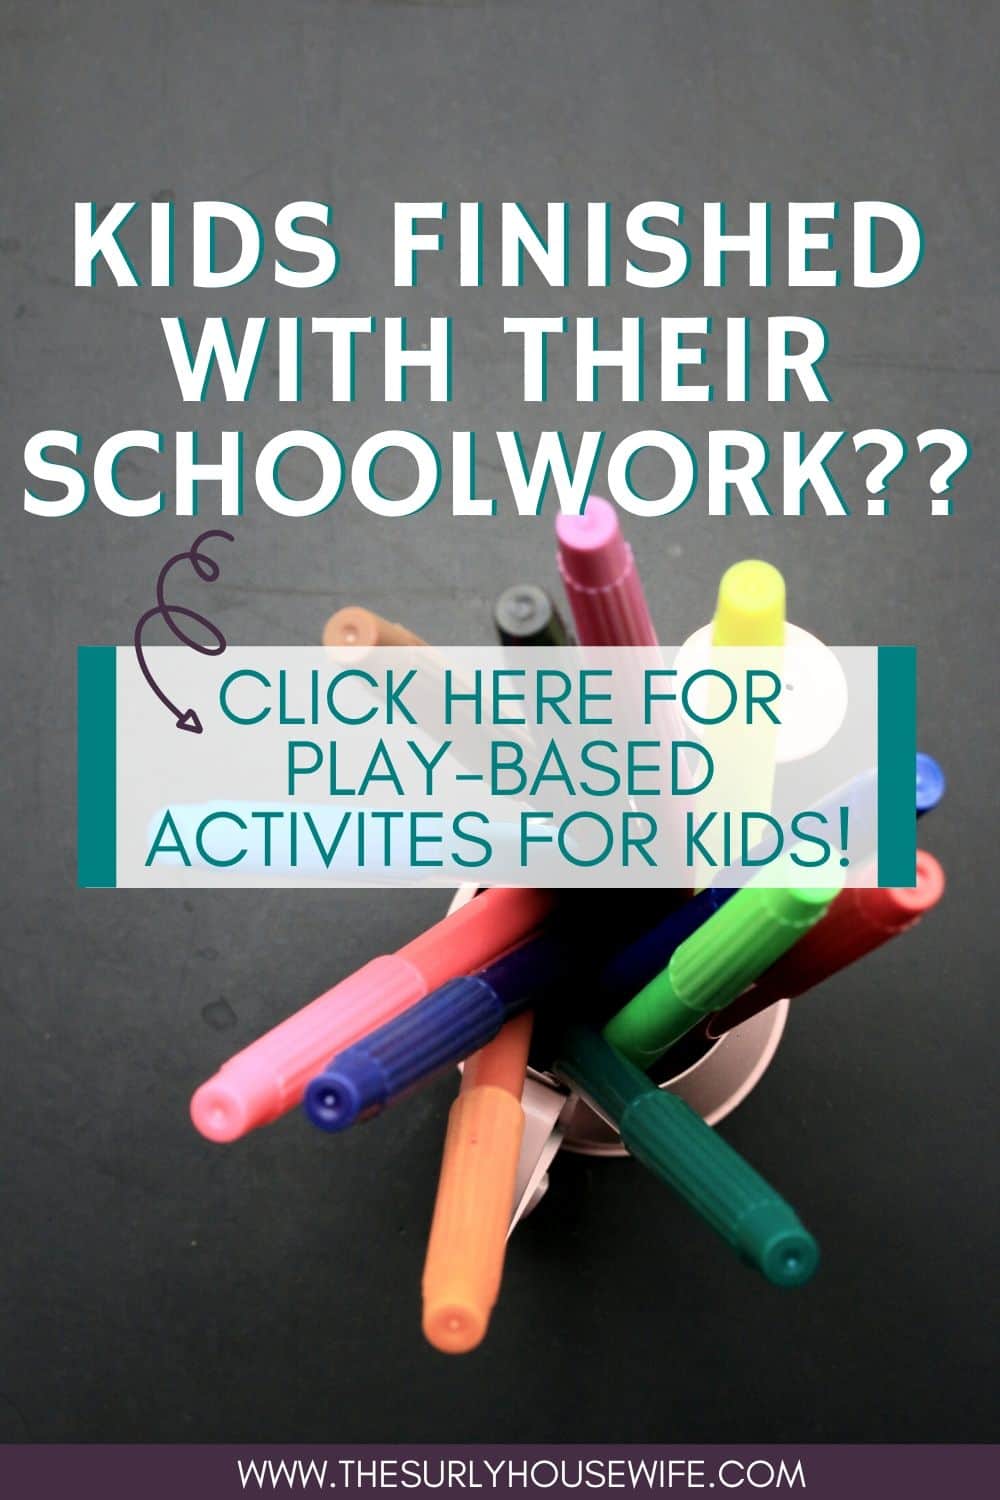 Do your kids get bored when they finish their schoolwork? Interested in play-based learning? Don't miss this post for activities to do at home with kids! 